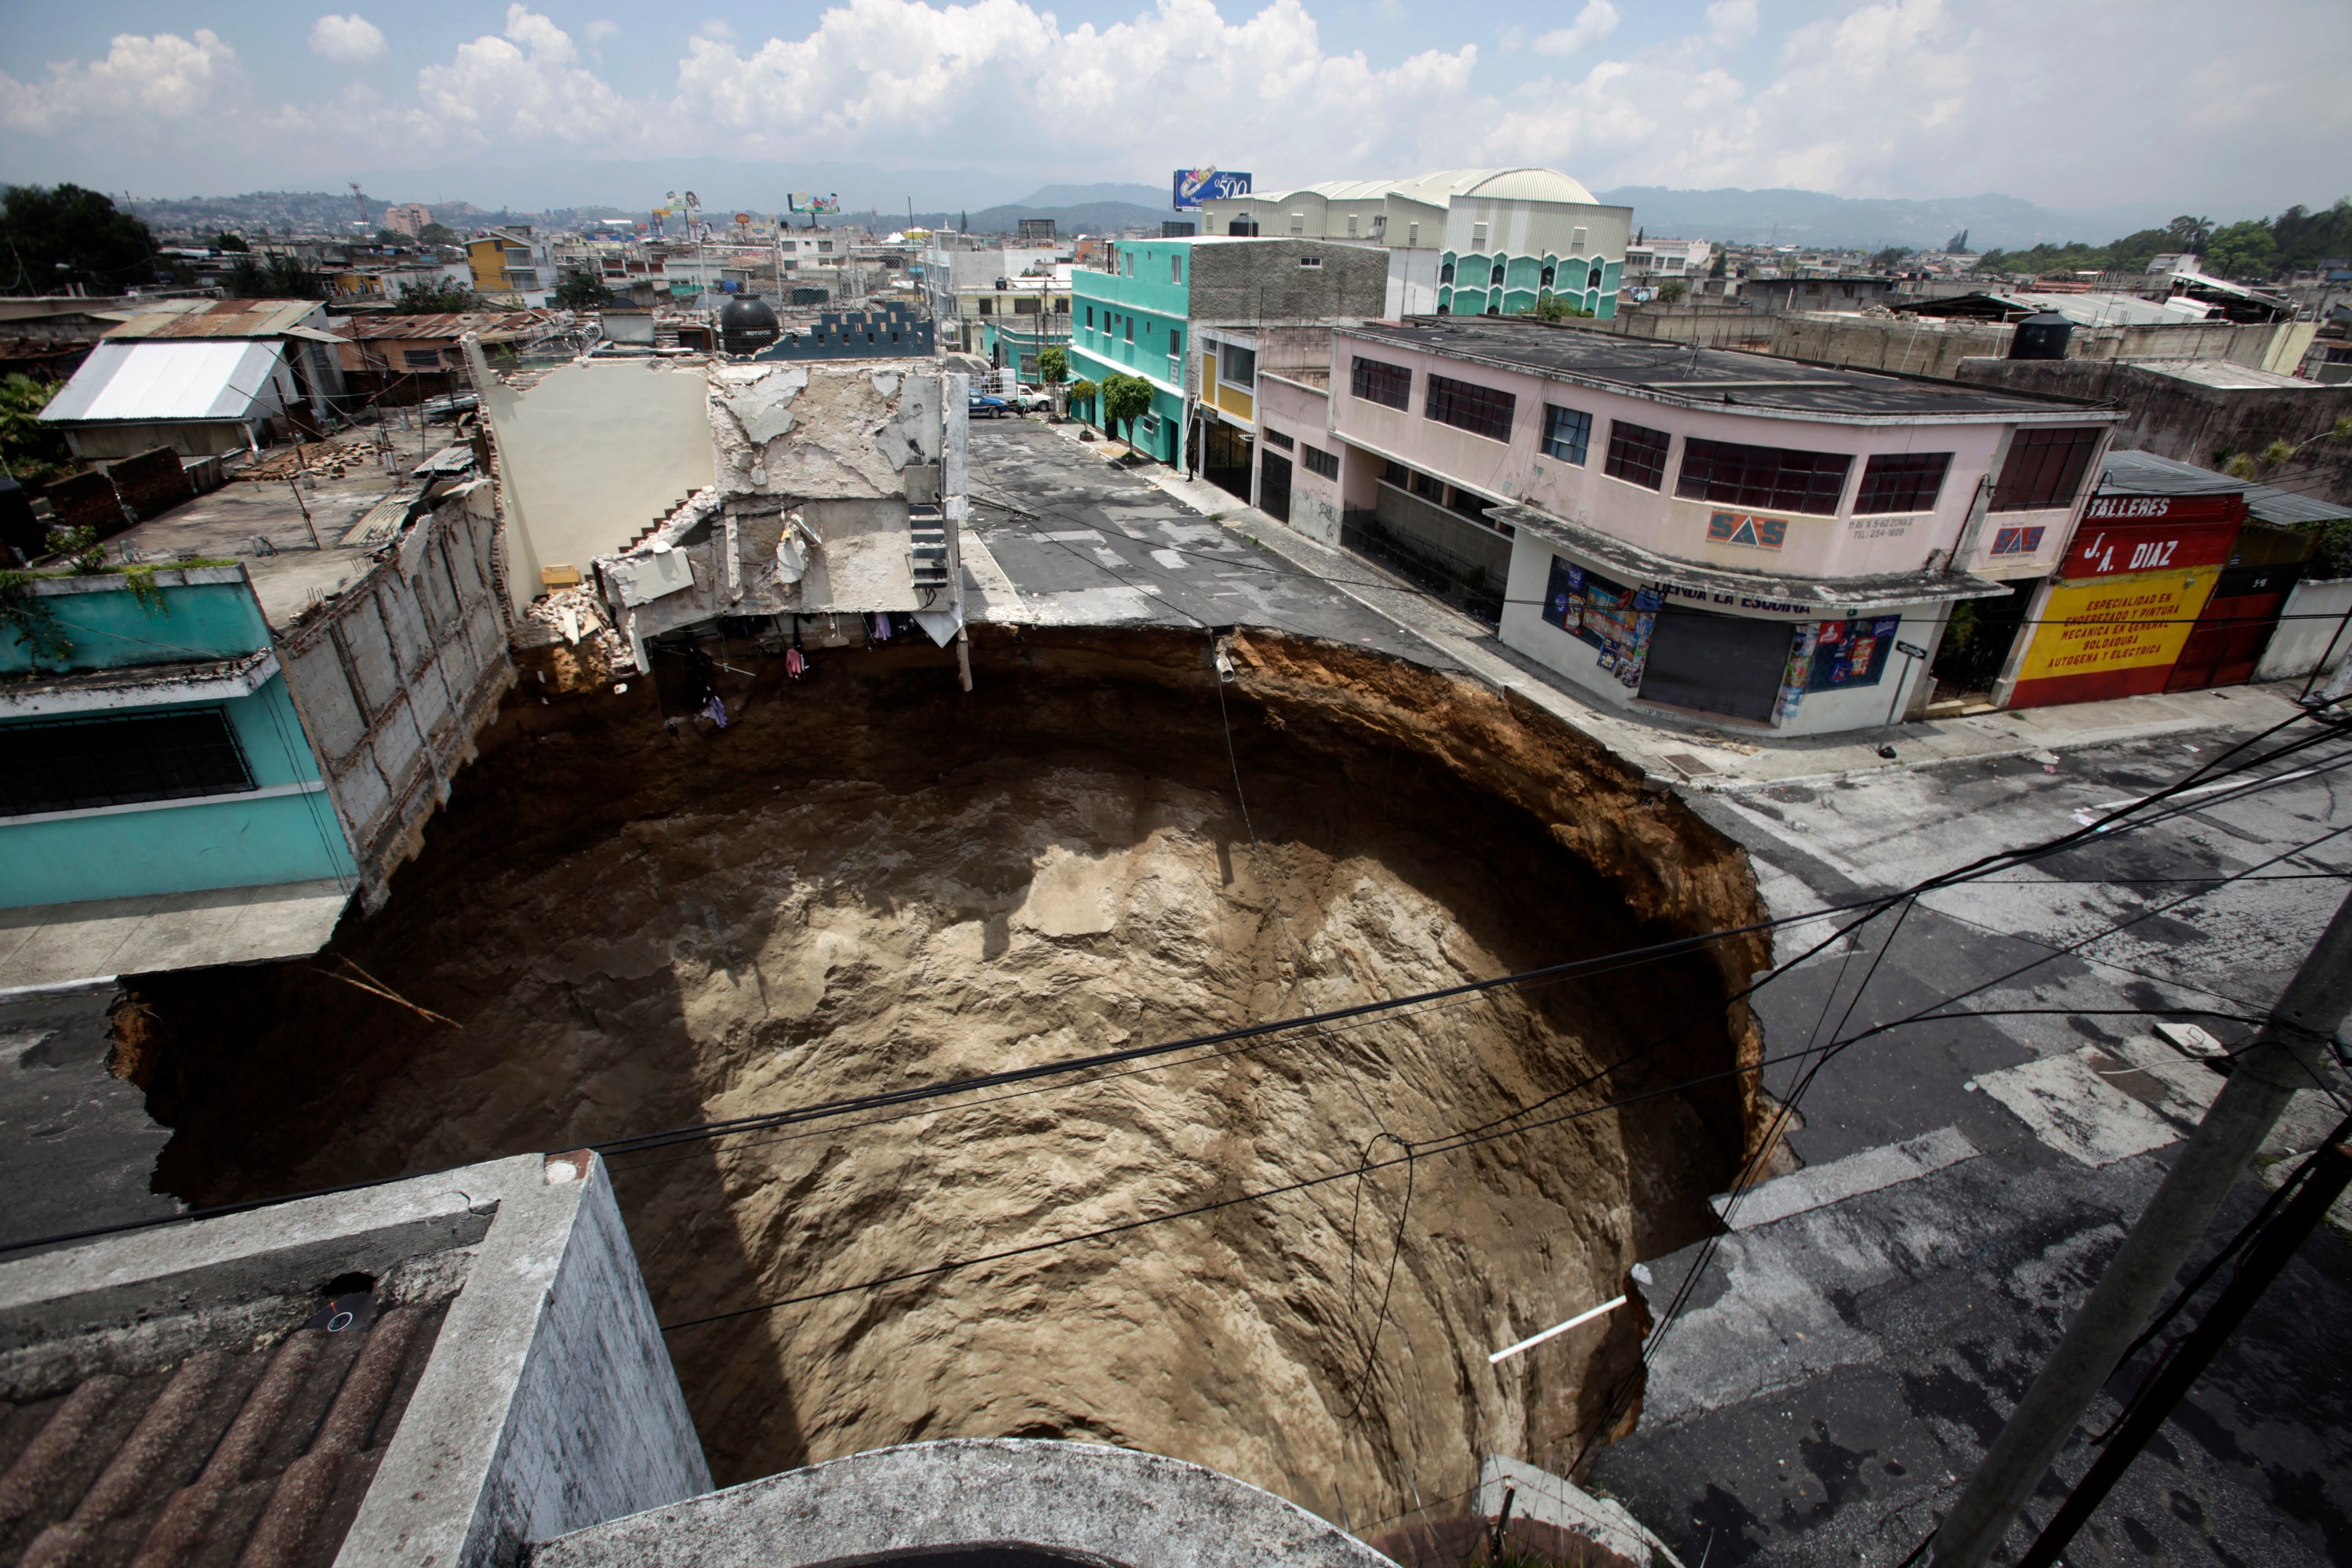 The sinkhole above opened up in Guatemala City in 2010, swallowing a three-storey building almost instantly.